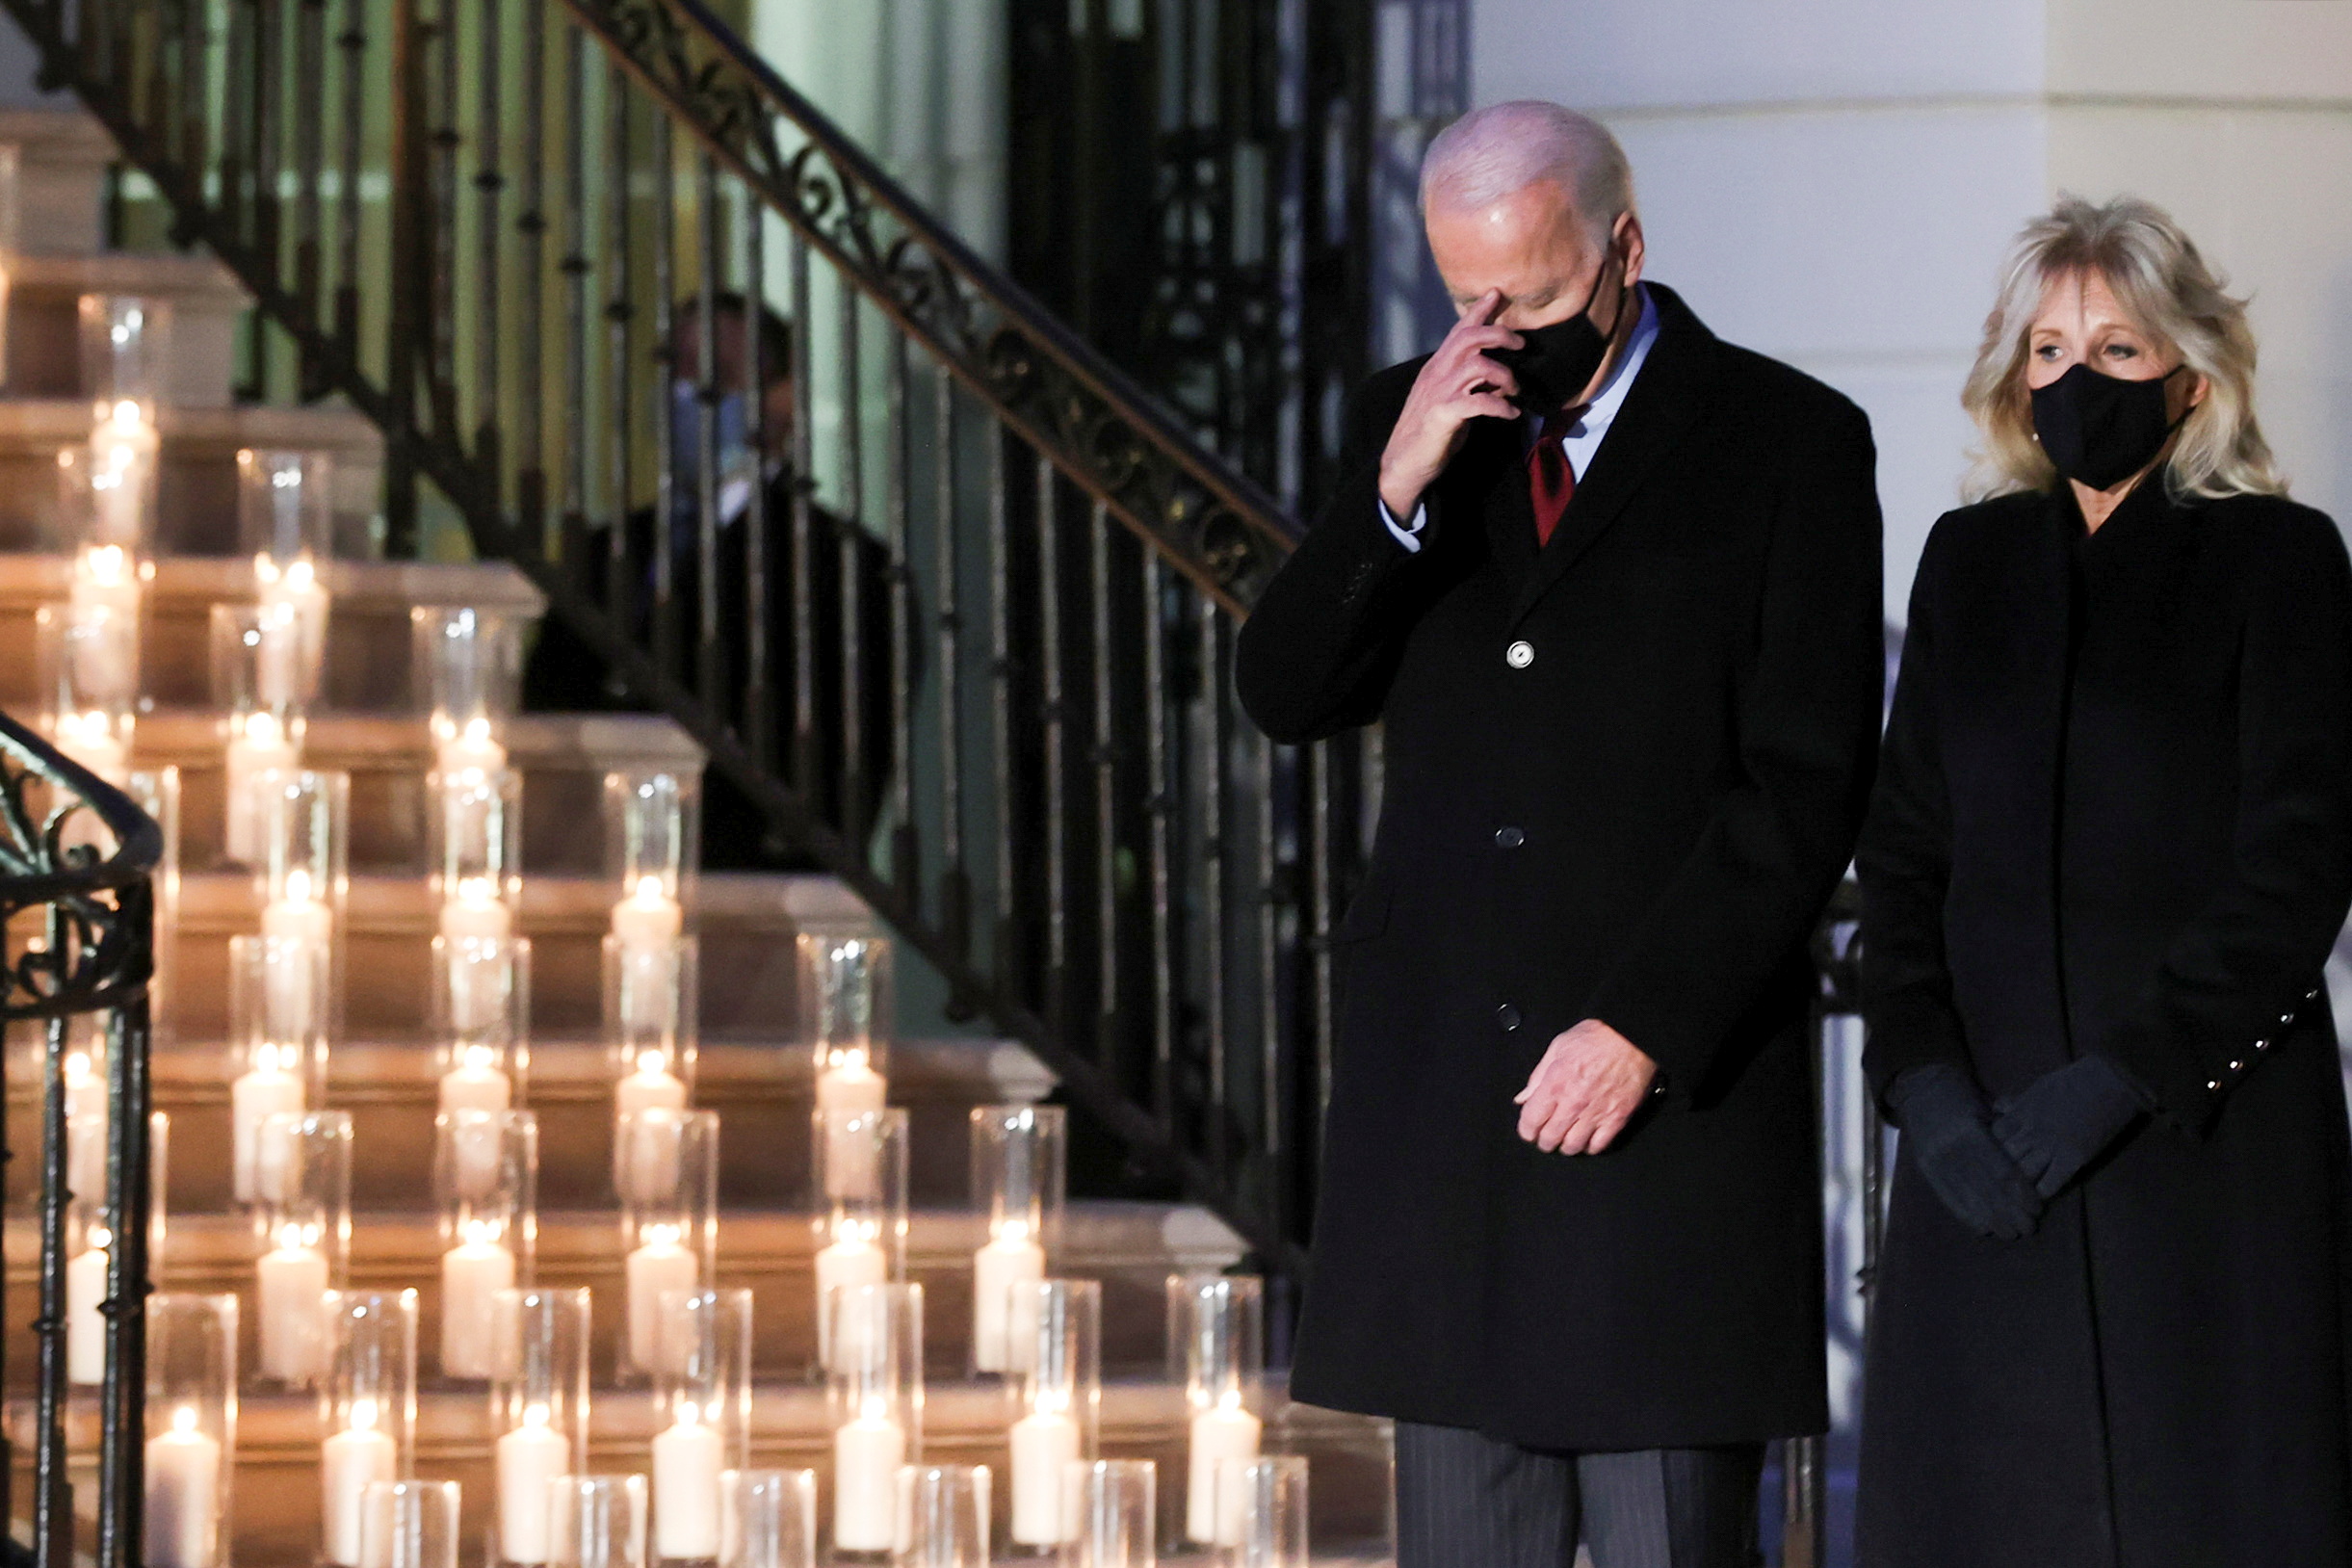 U.S. President Joe Biden commemorates the grim milestone of 500,000 U.S. deaths from the coronavirus disease (COVID-19) during a moment of silence and candle lighting ceremony at the White House in Washington